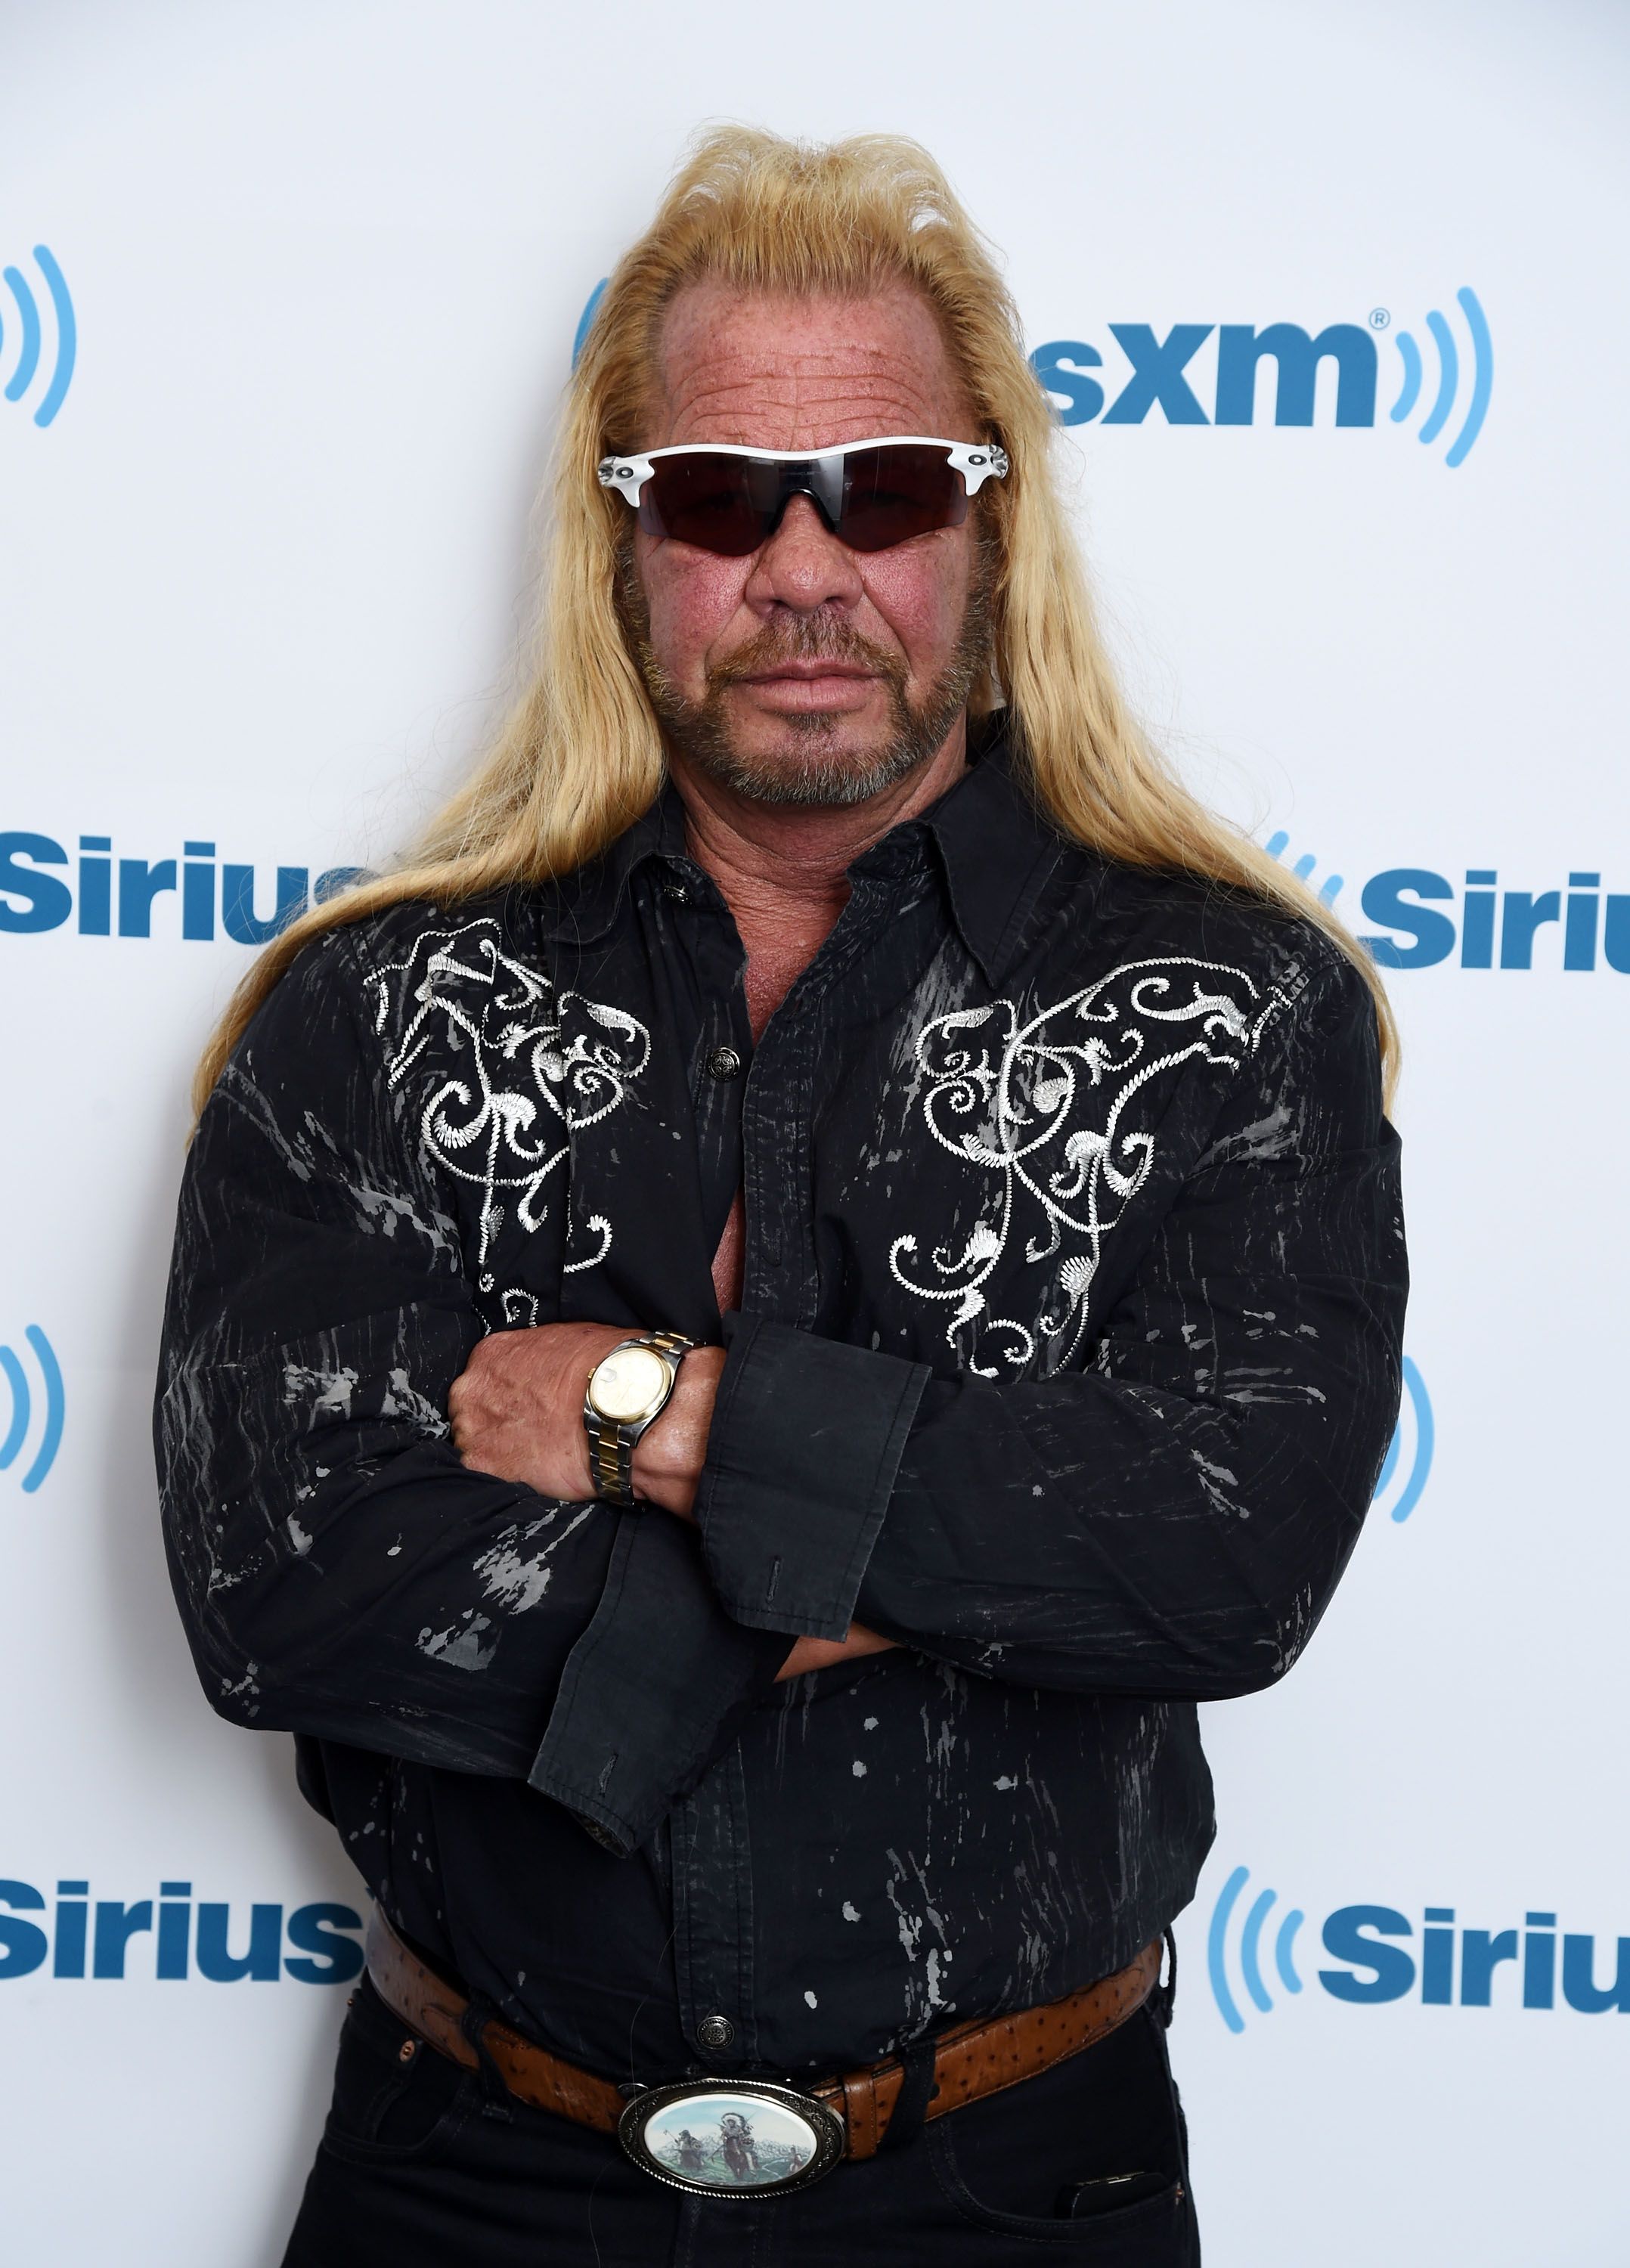 Dog the Bounty Hunter, Duane Chapman visits the SiriusXM Studios on April 24, 2015. | Photo: Getty Images